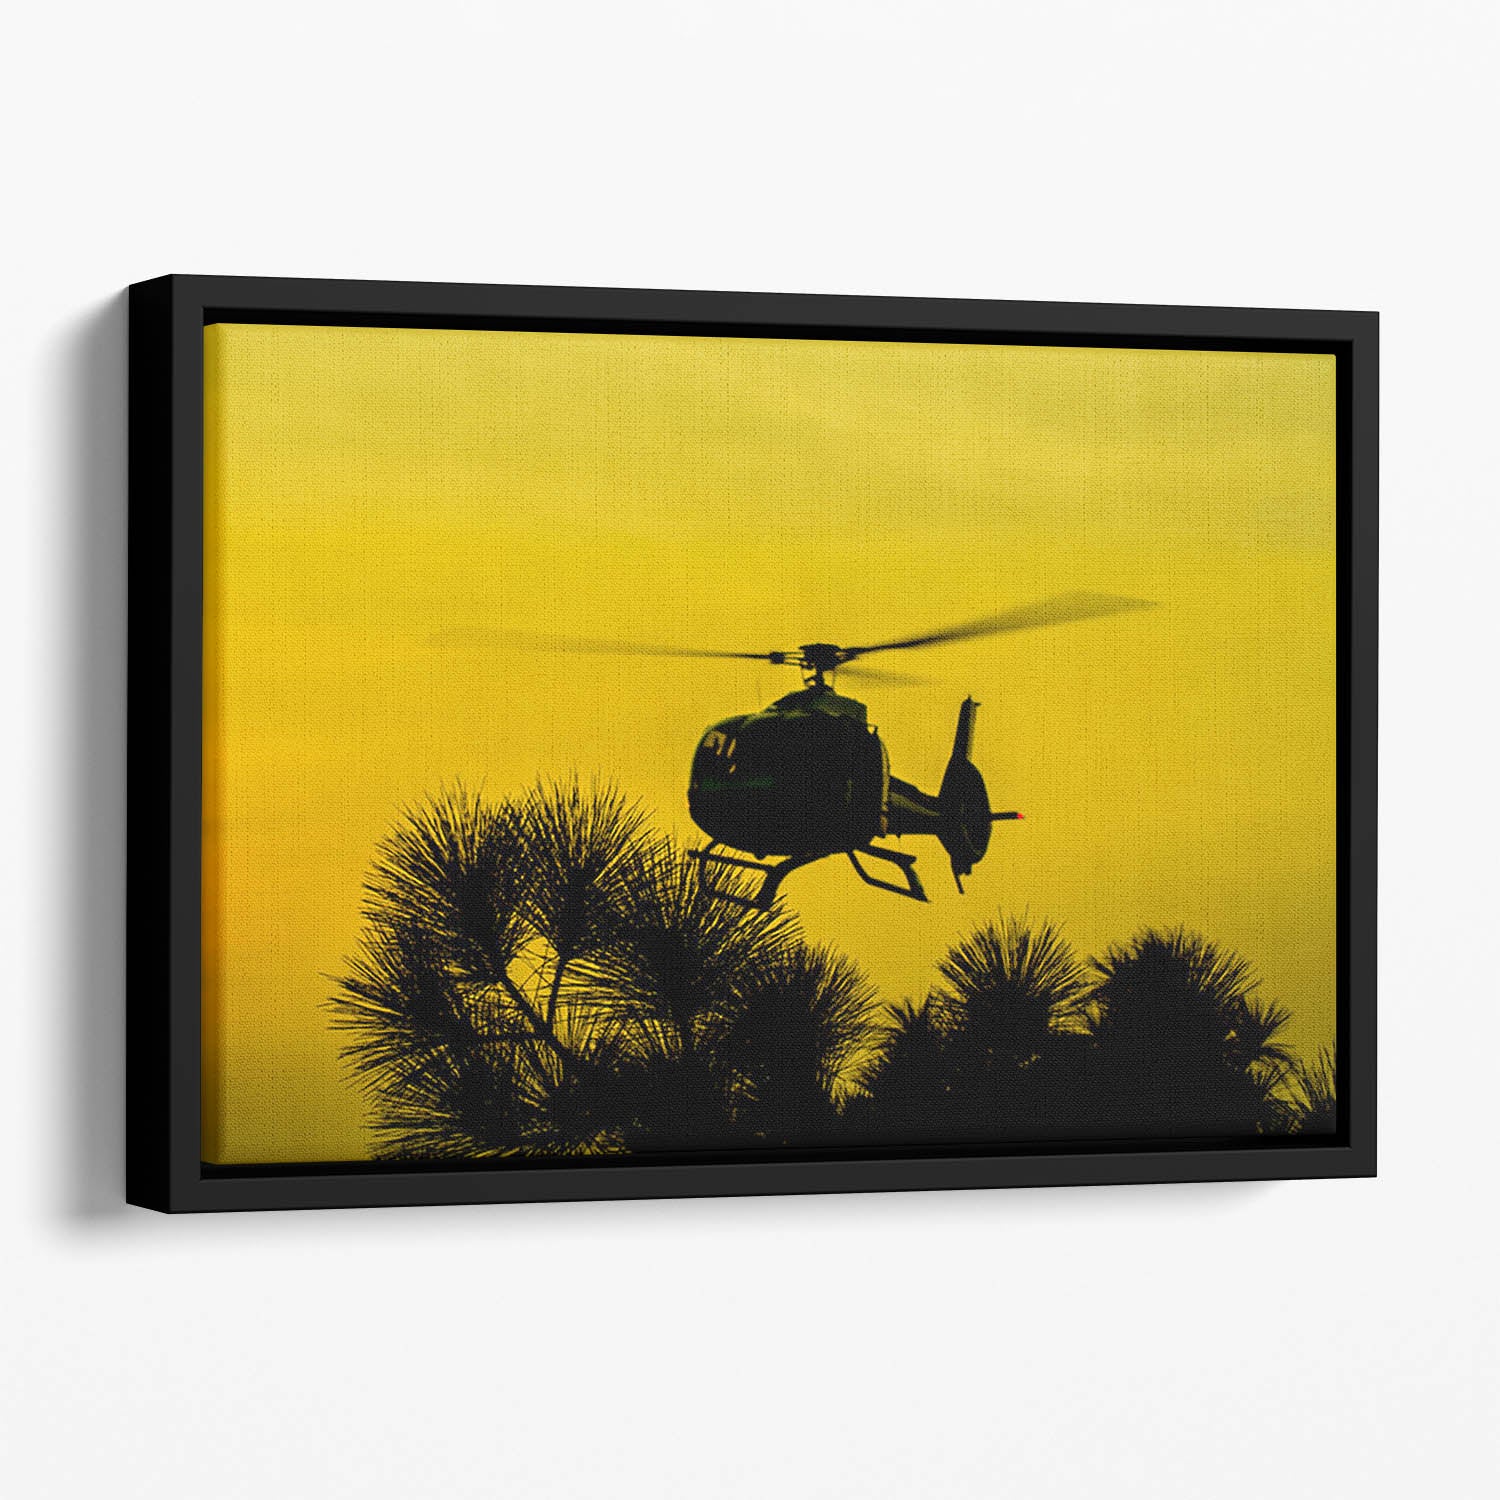 Patrol Helicopter flying in the sky Floating Framed Canvas